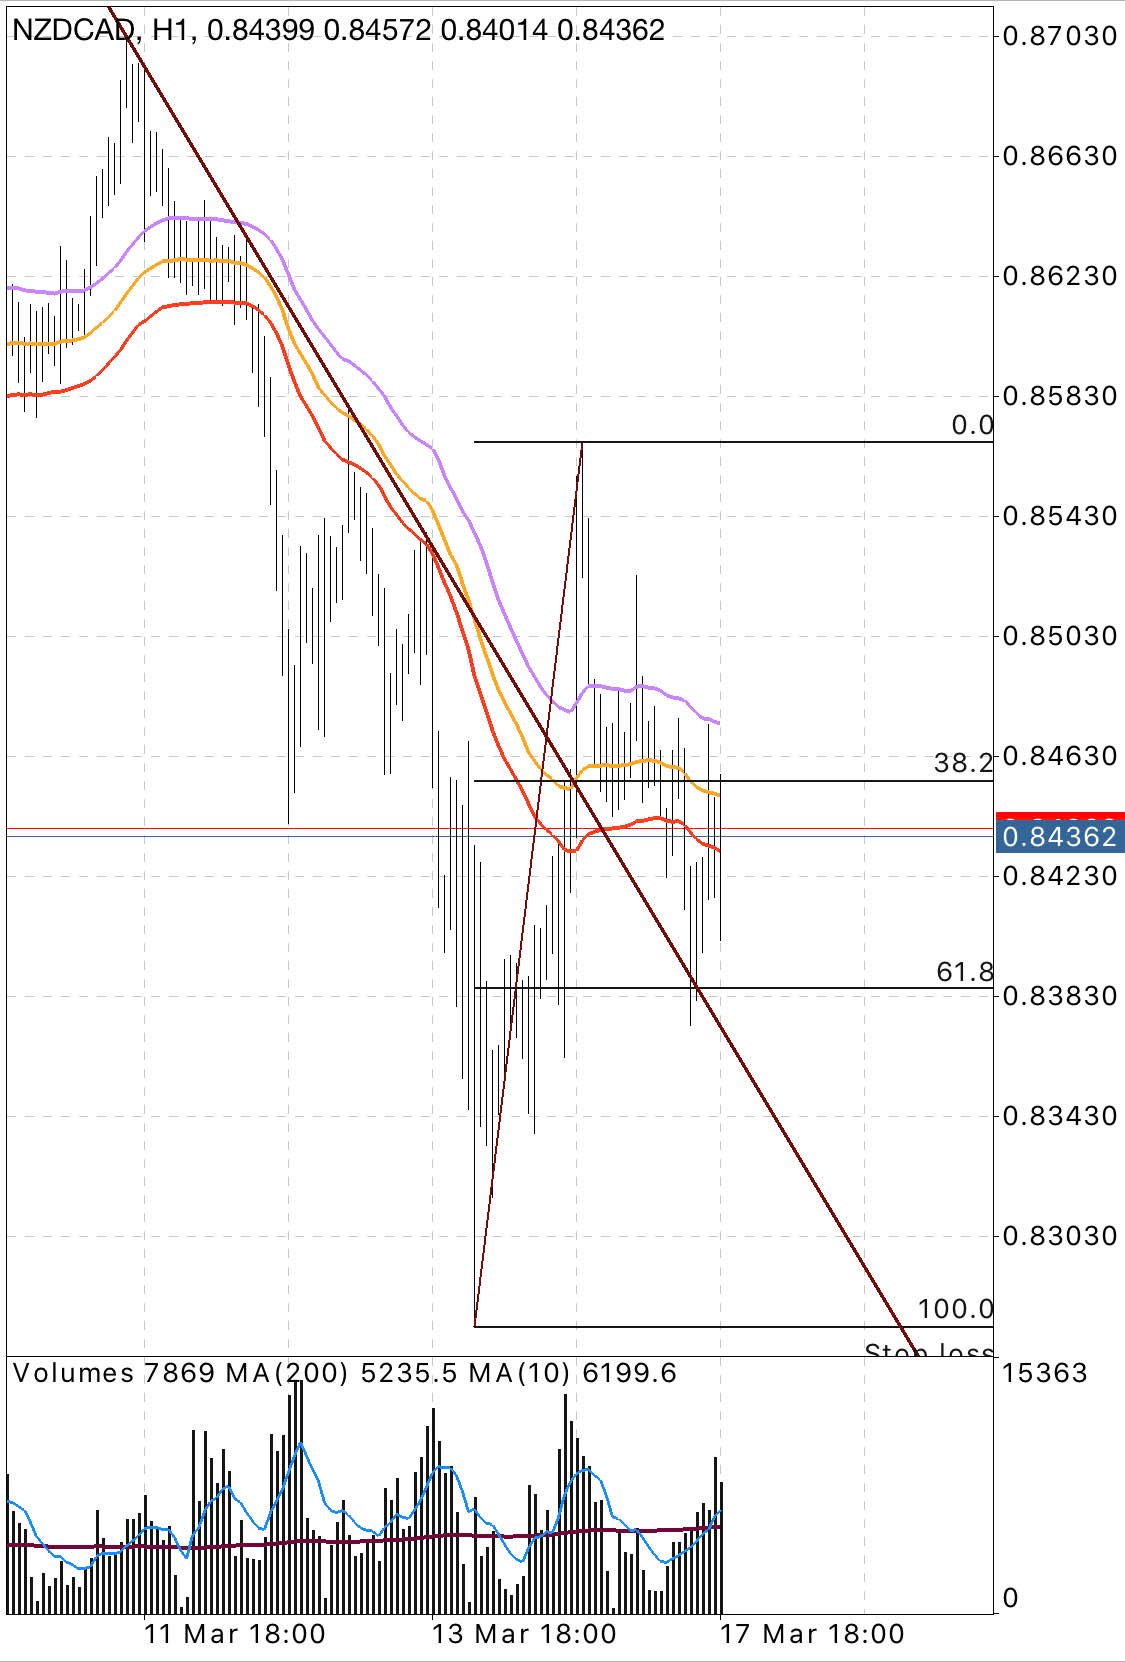 NZDCAD is it the time to go long?